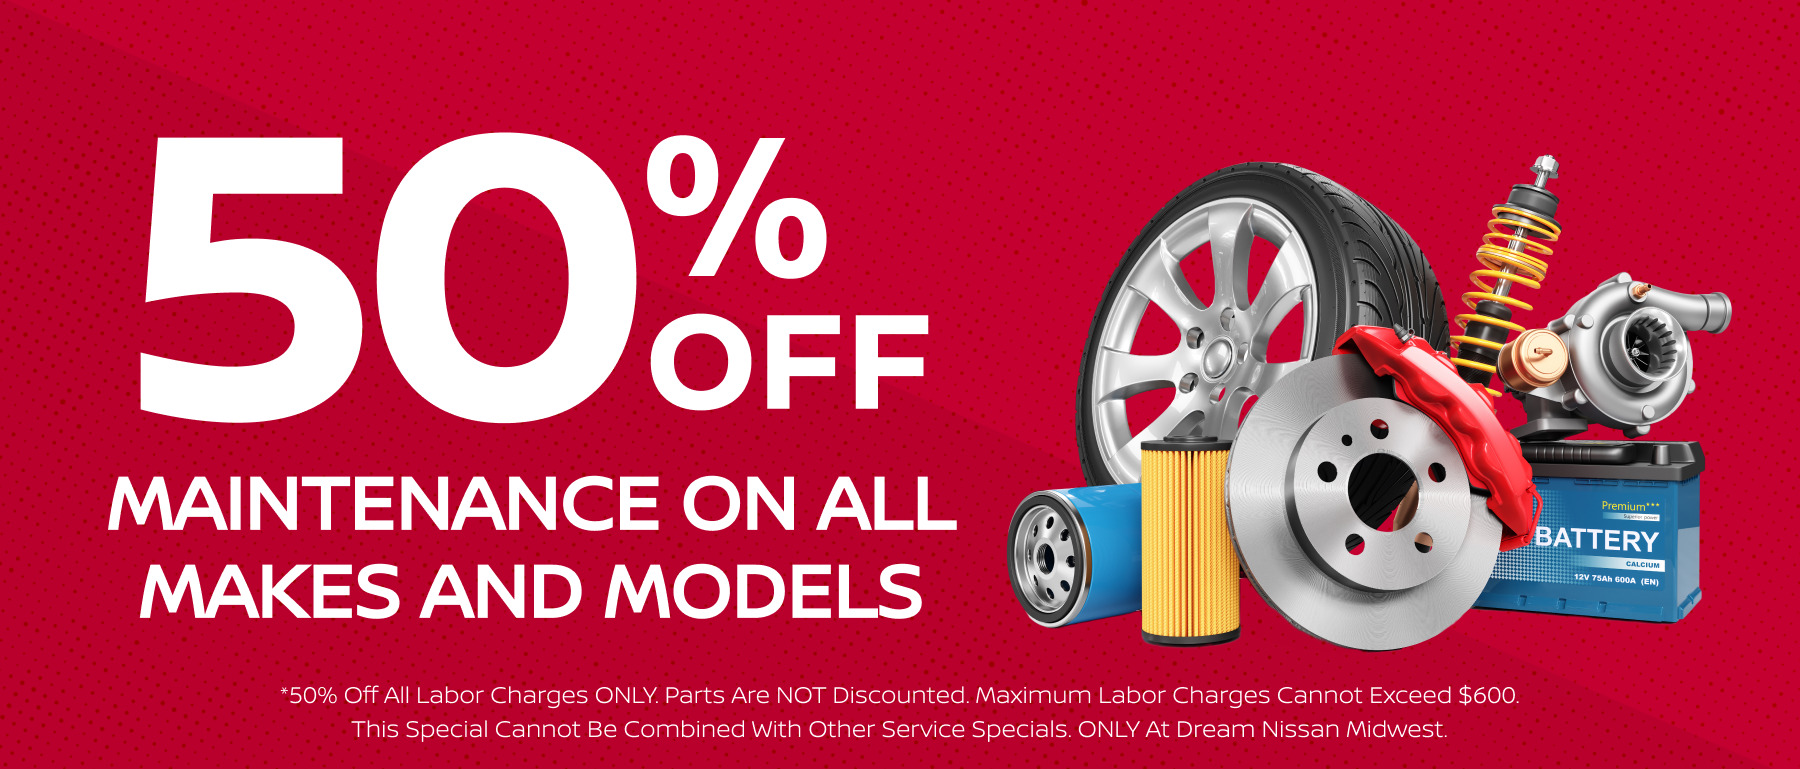 50% off maintenance on all models